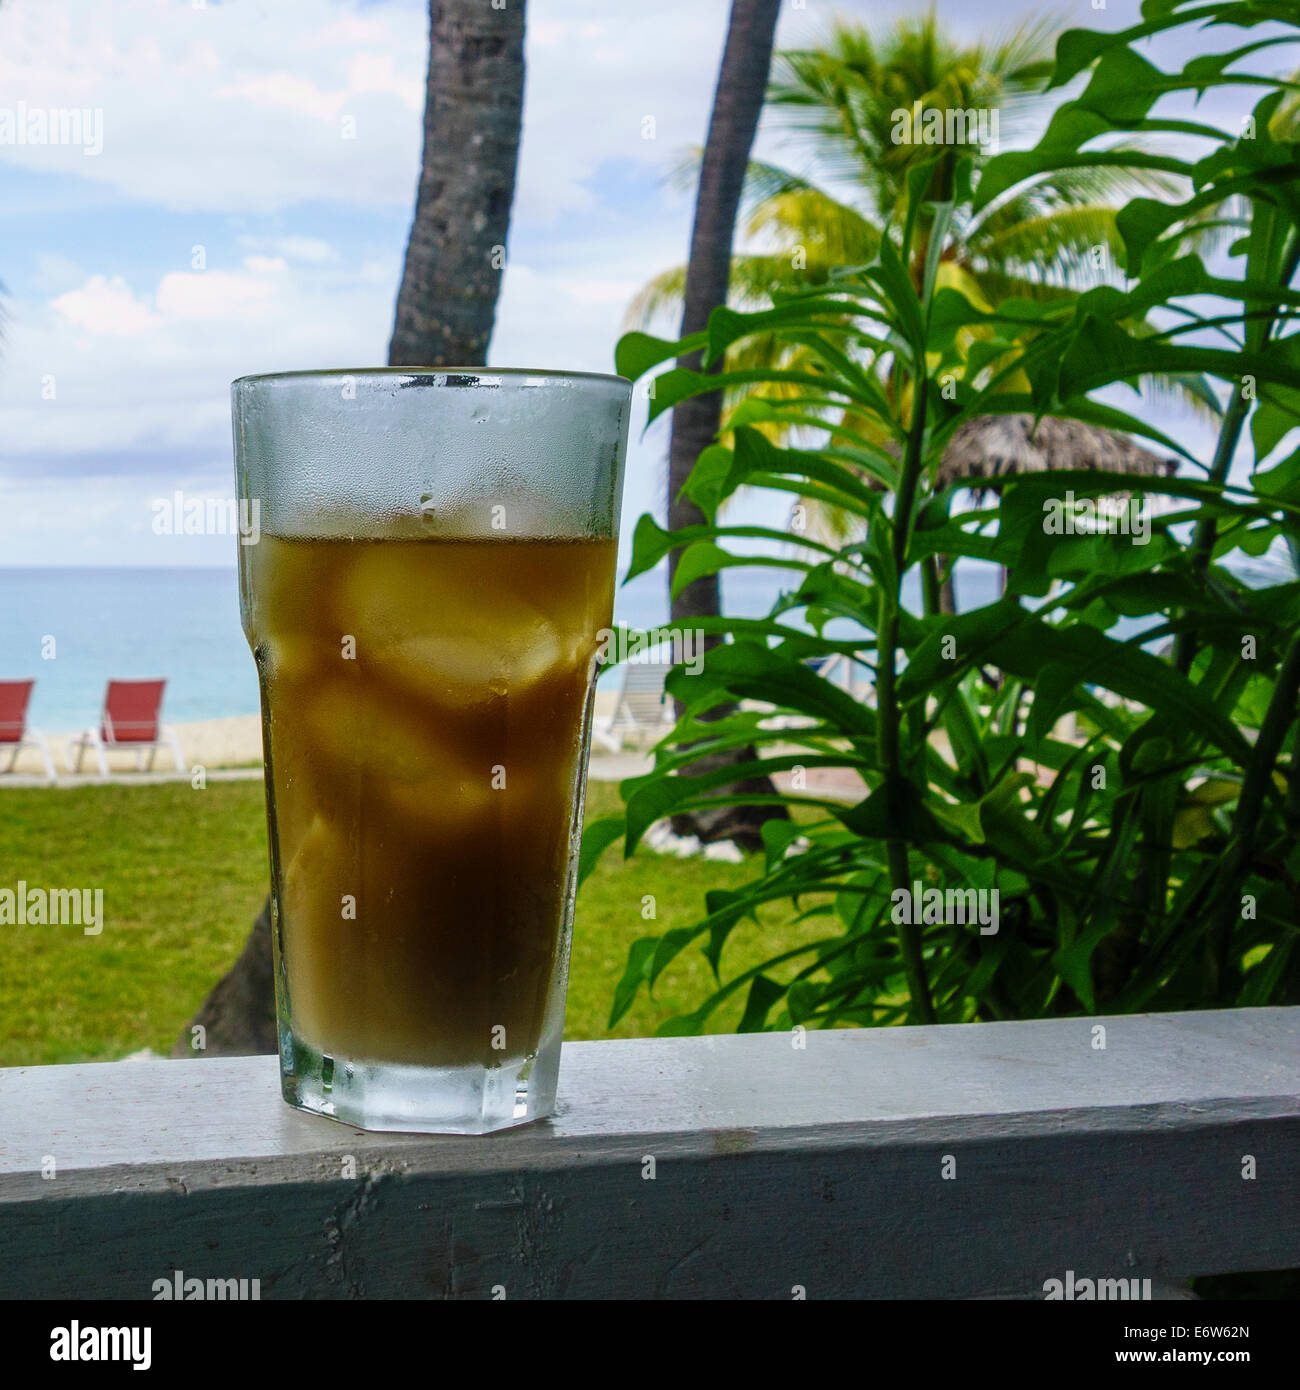 A glass of iced tea sits on a balcony railing overlooking the Caribbean sea on the island of St. Croix, U.S. Virgin Islands. Stock Photo